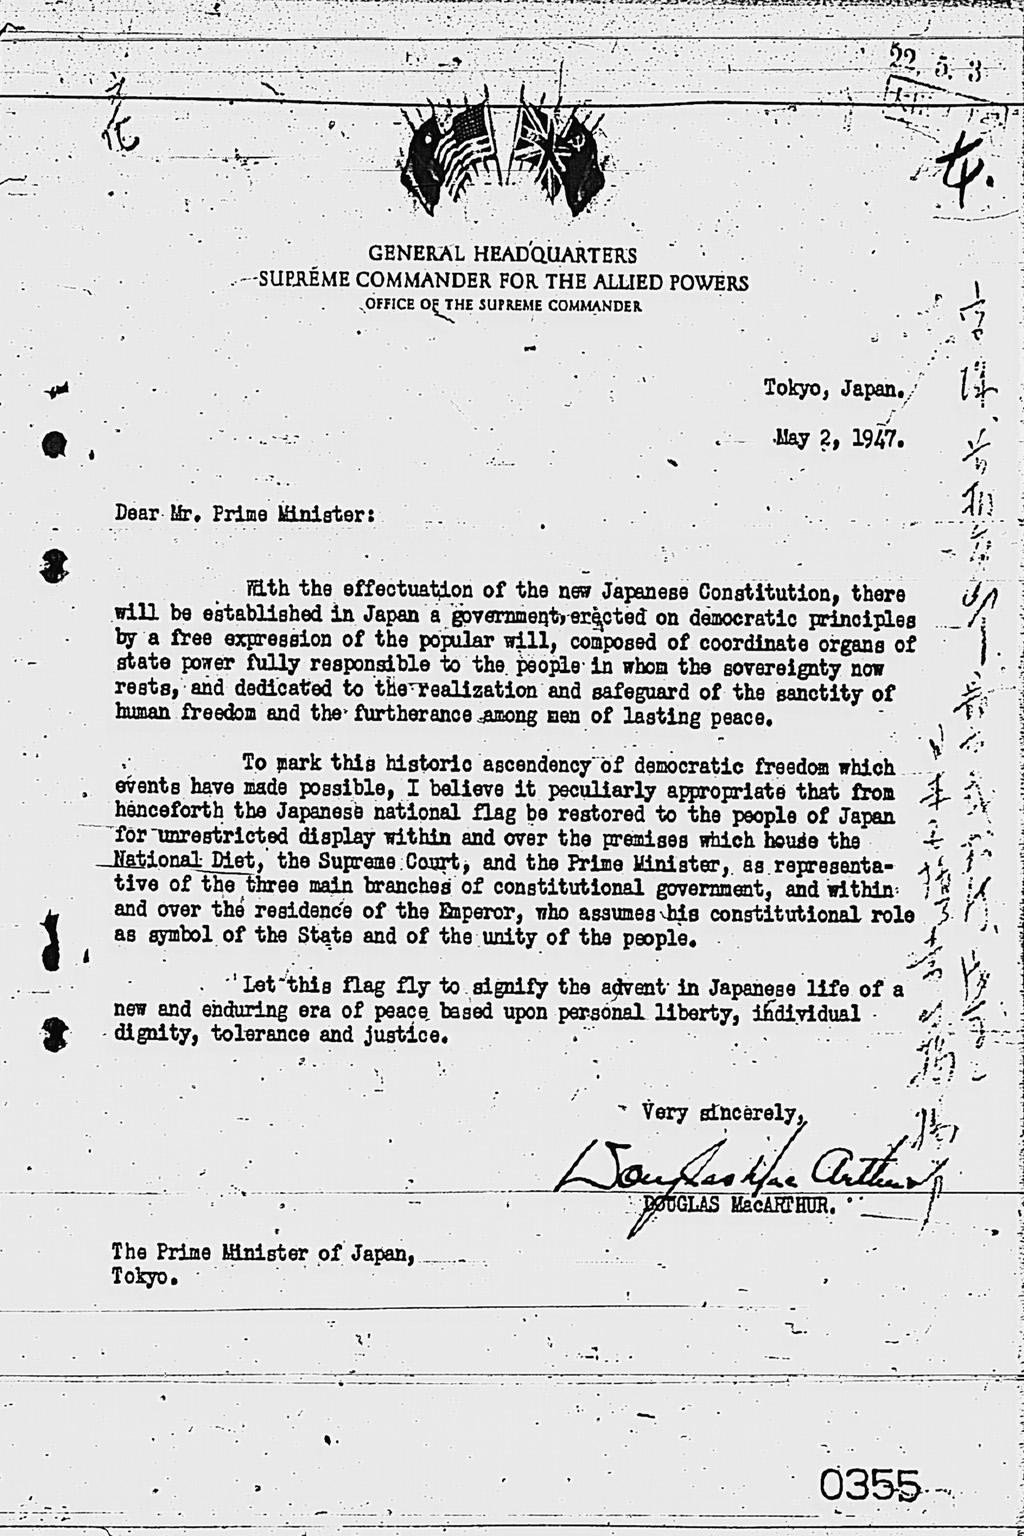 『Letter from Douglas MacArthur to Prime Minister dated May 2, 1947』(拡大画像)